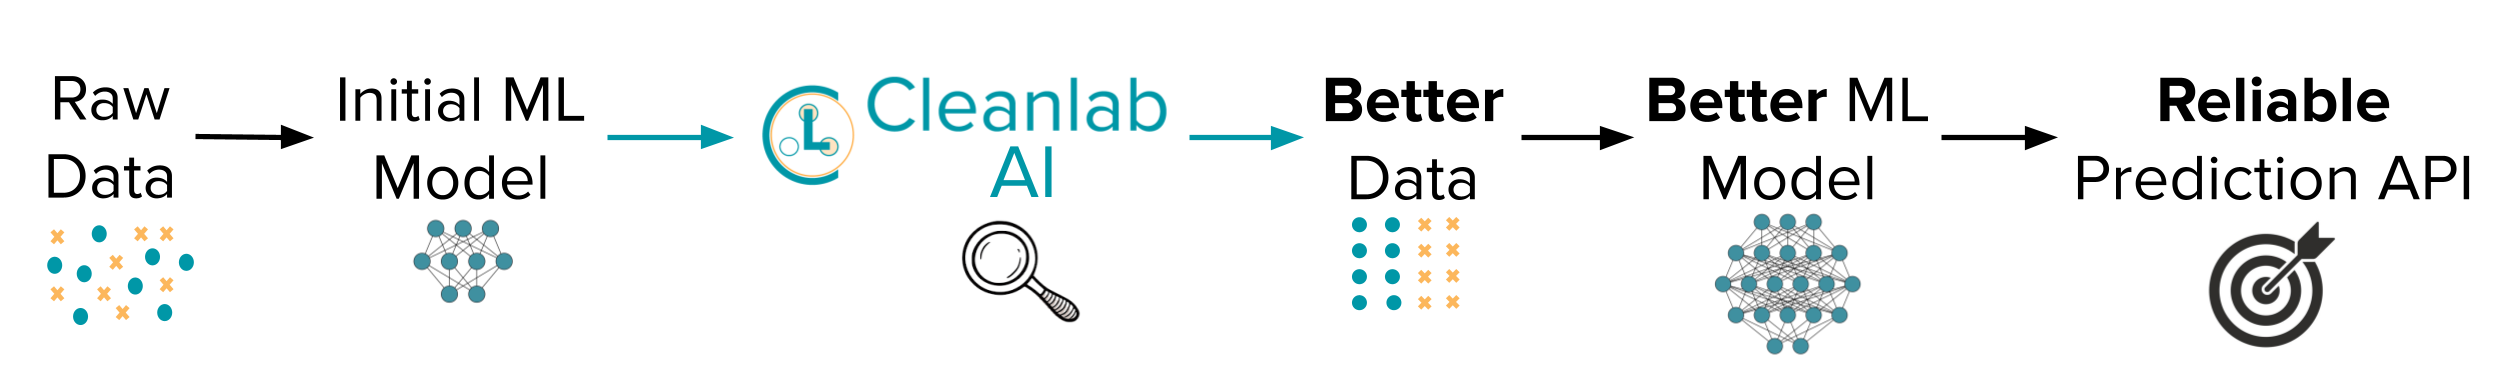 End-to-end overview of pipeline to turn raw data into reliable predictions with Cleanlab Studio